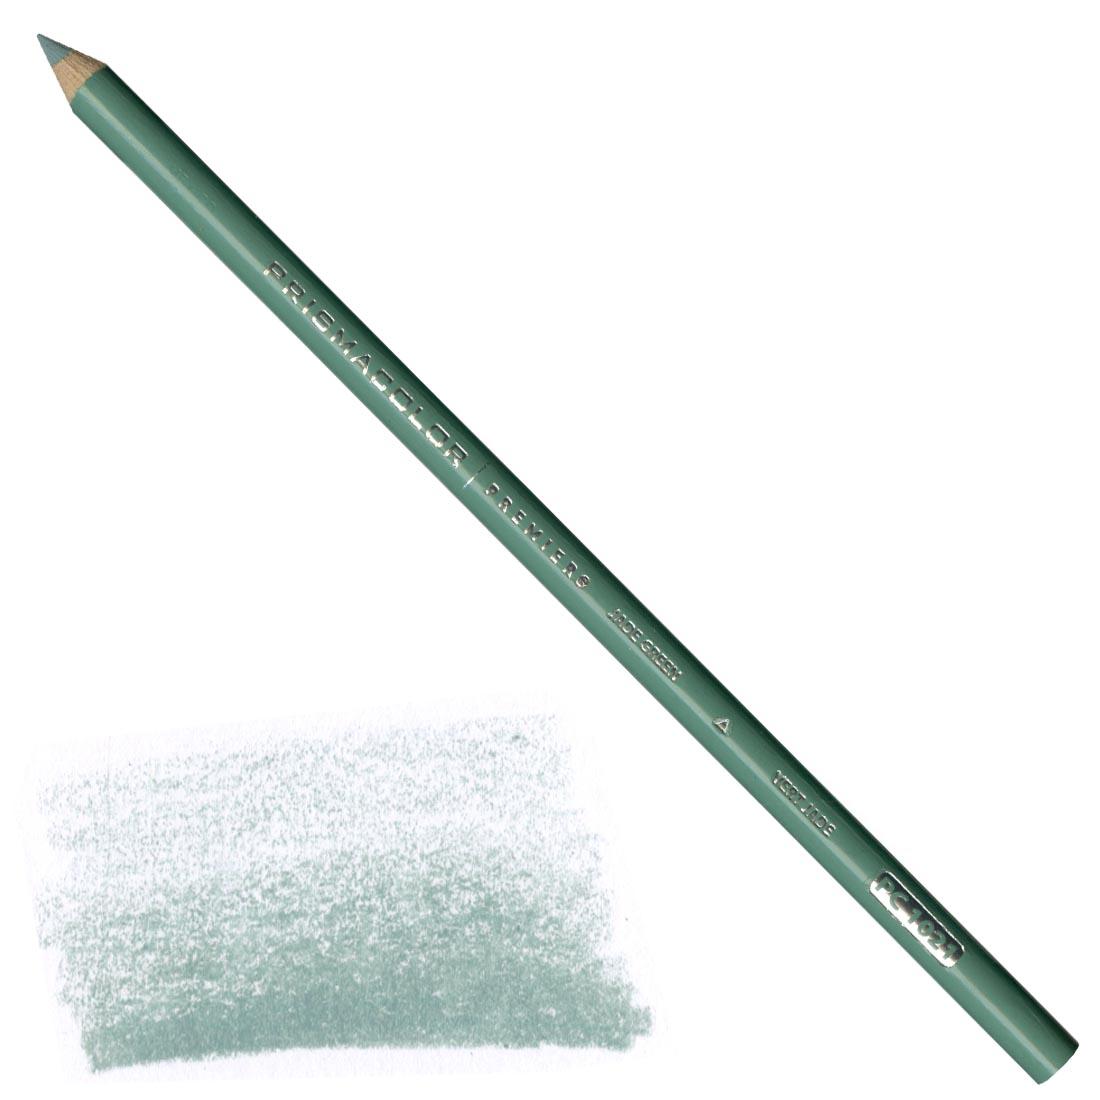 Jade Green Prismacolor Premier Colored Pencil with a sample colored swatch